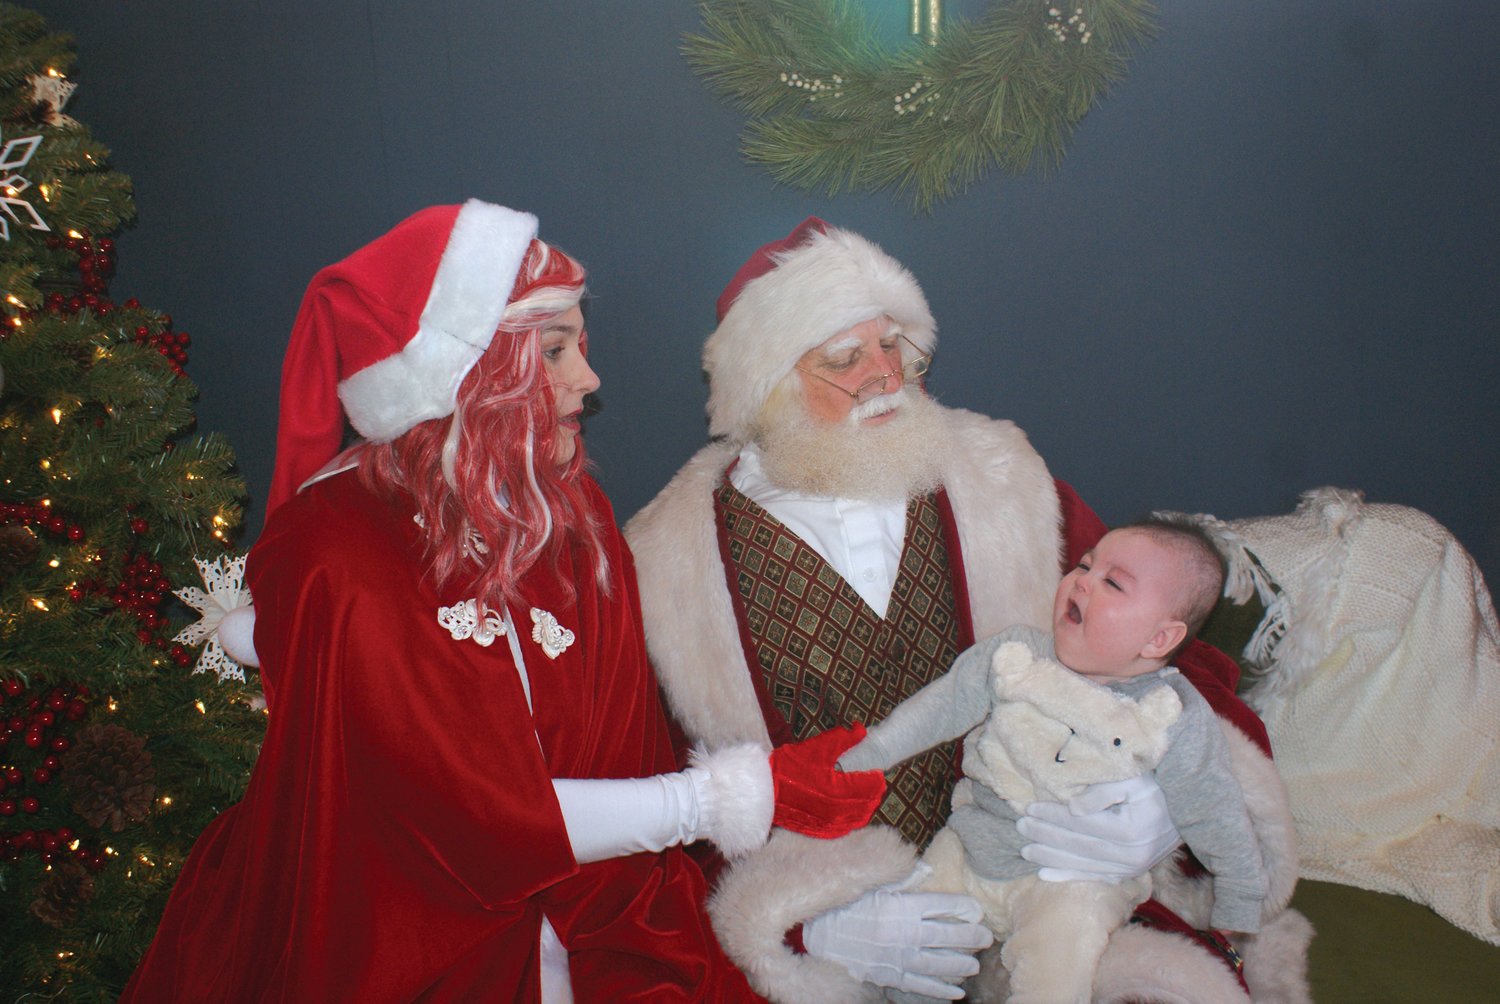 FIRST VISIT WITH SANTA: 6-month-old Rocco Hanley visited Santa in the Garden City Center this past Saturday. Assisting Santa this year was Cringle the Elf.